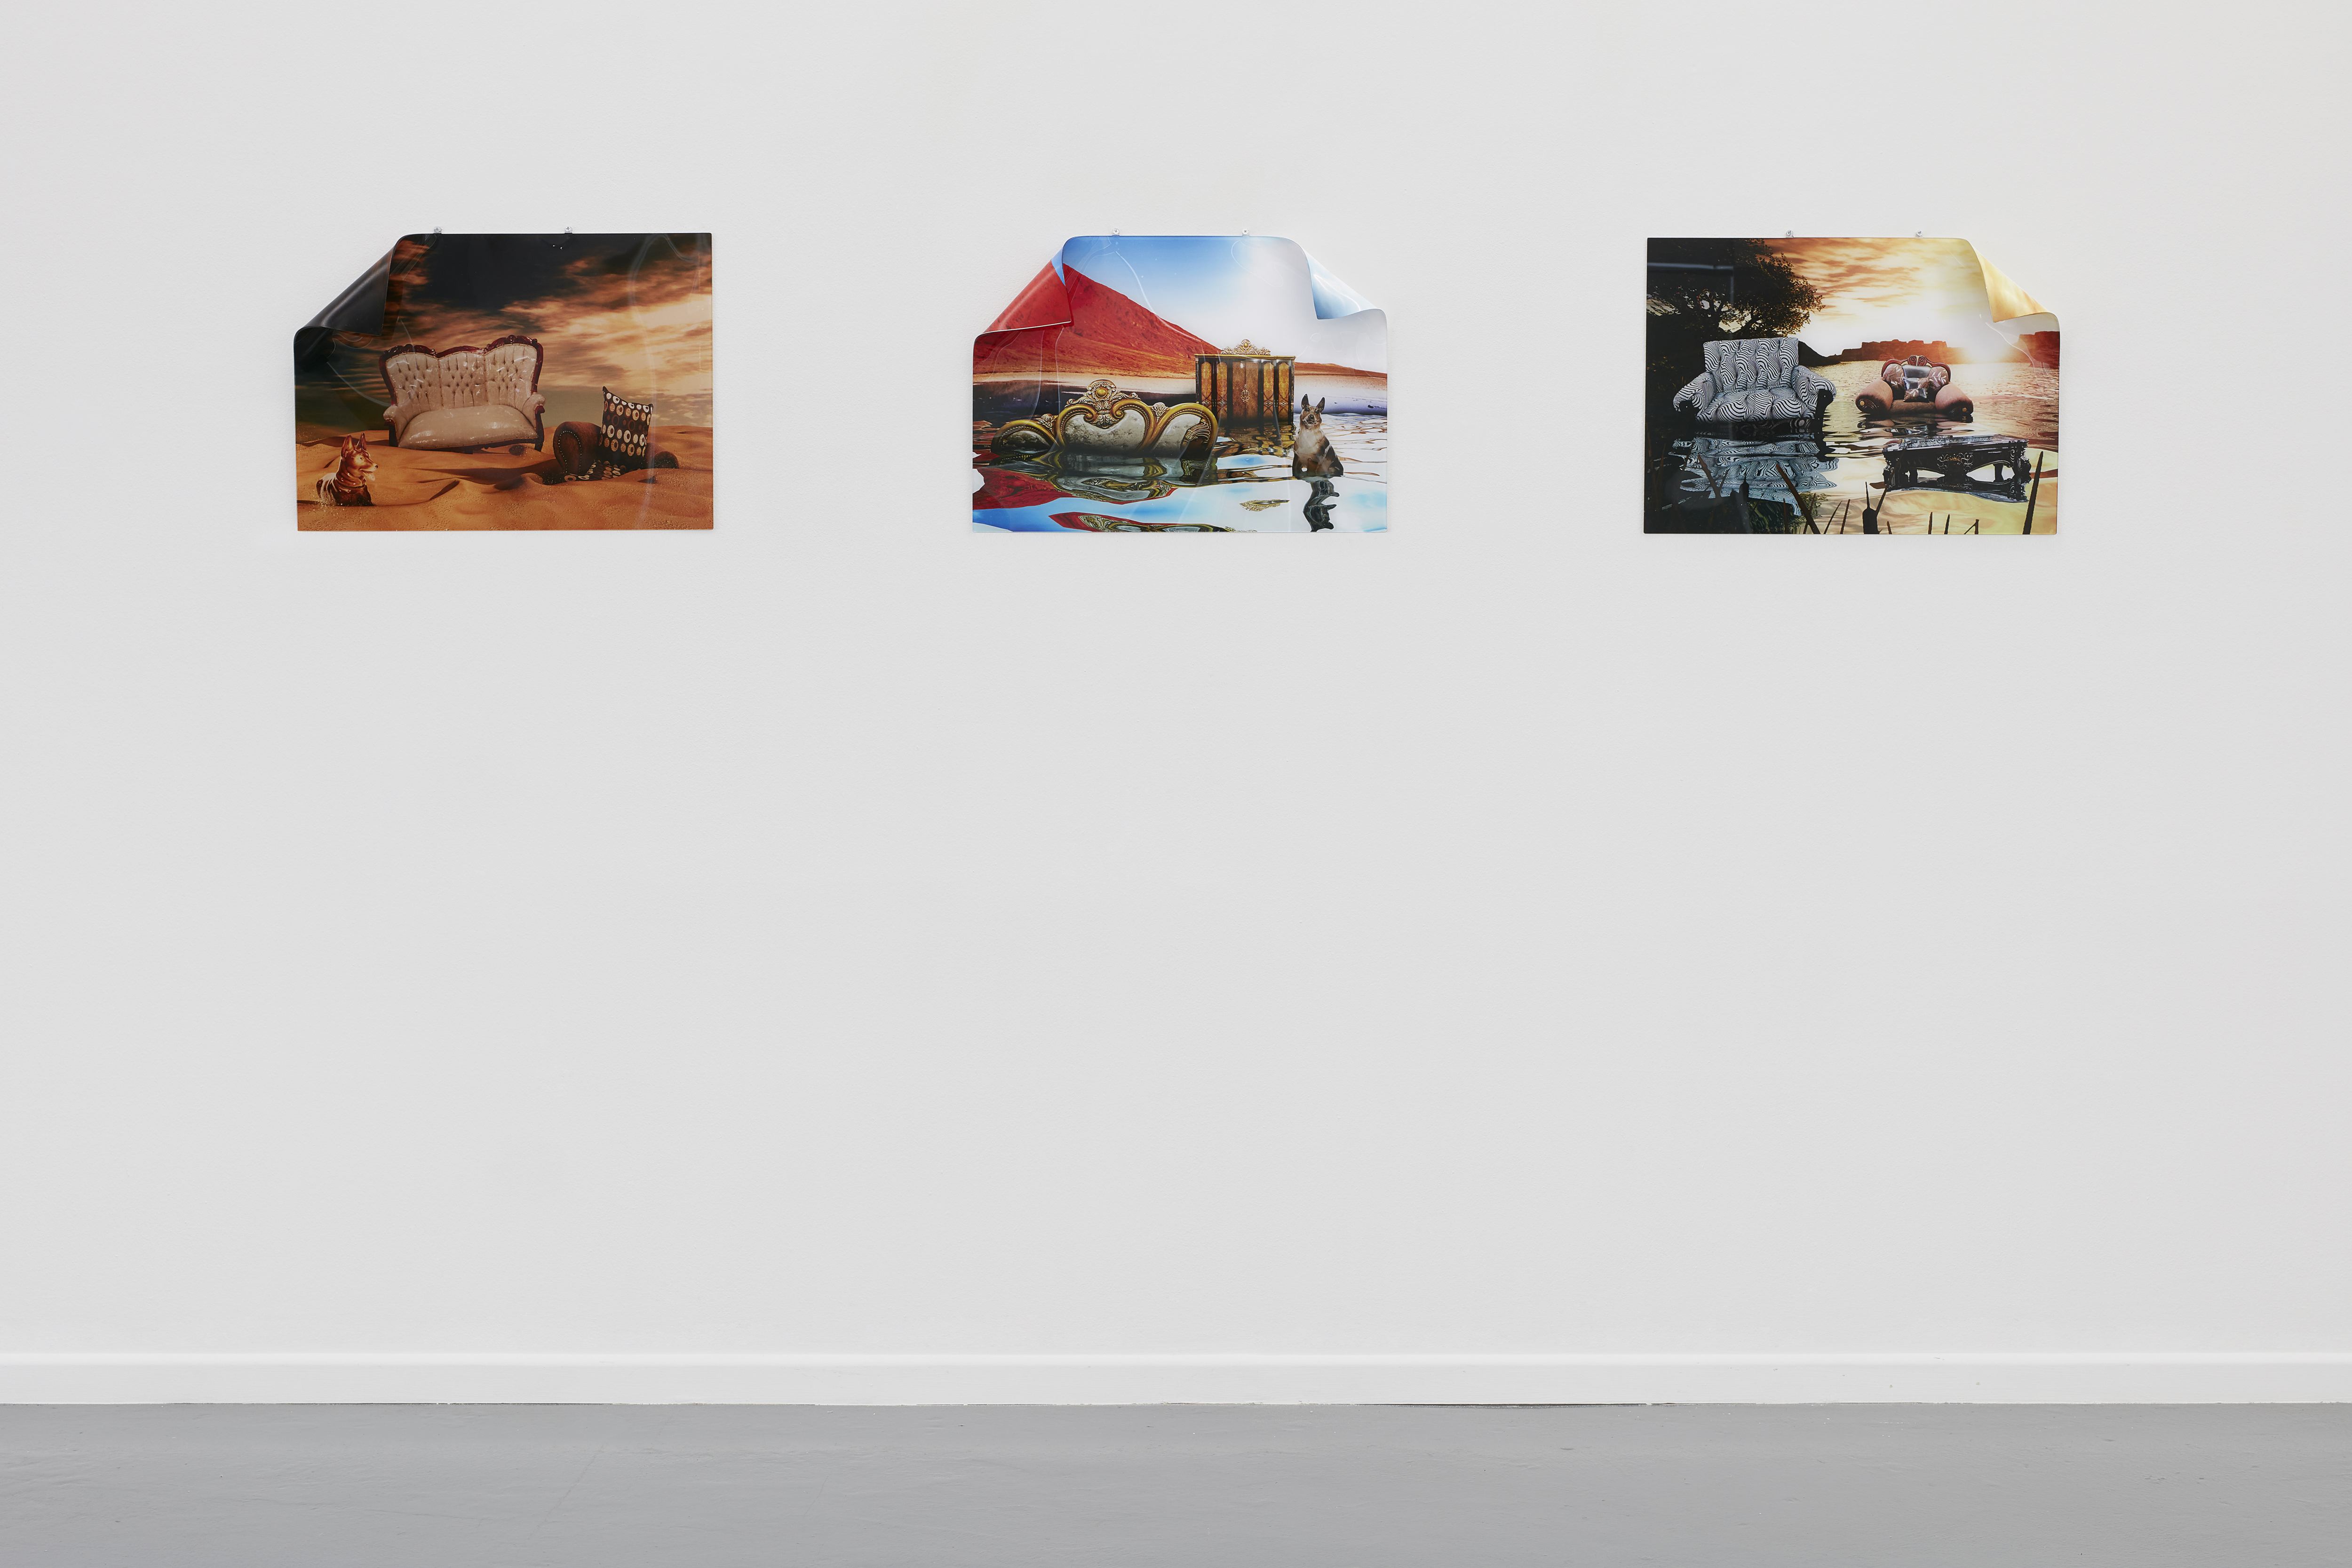 Installation view of Post-Lay-Buy 1, 2 and 3